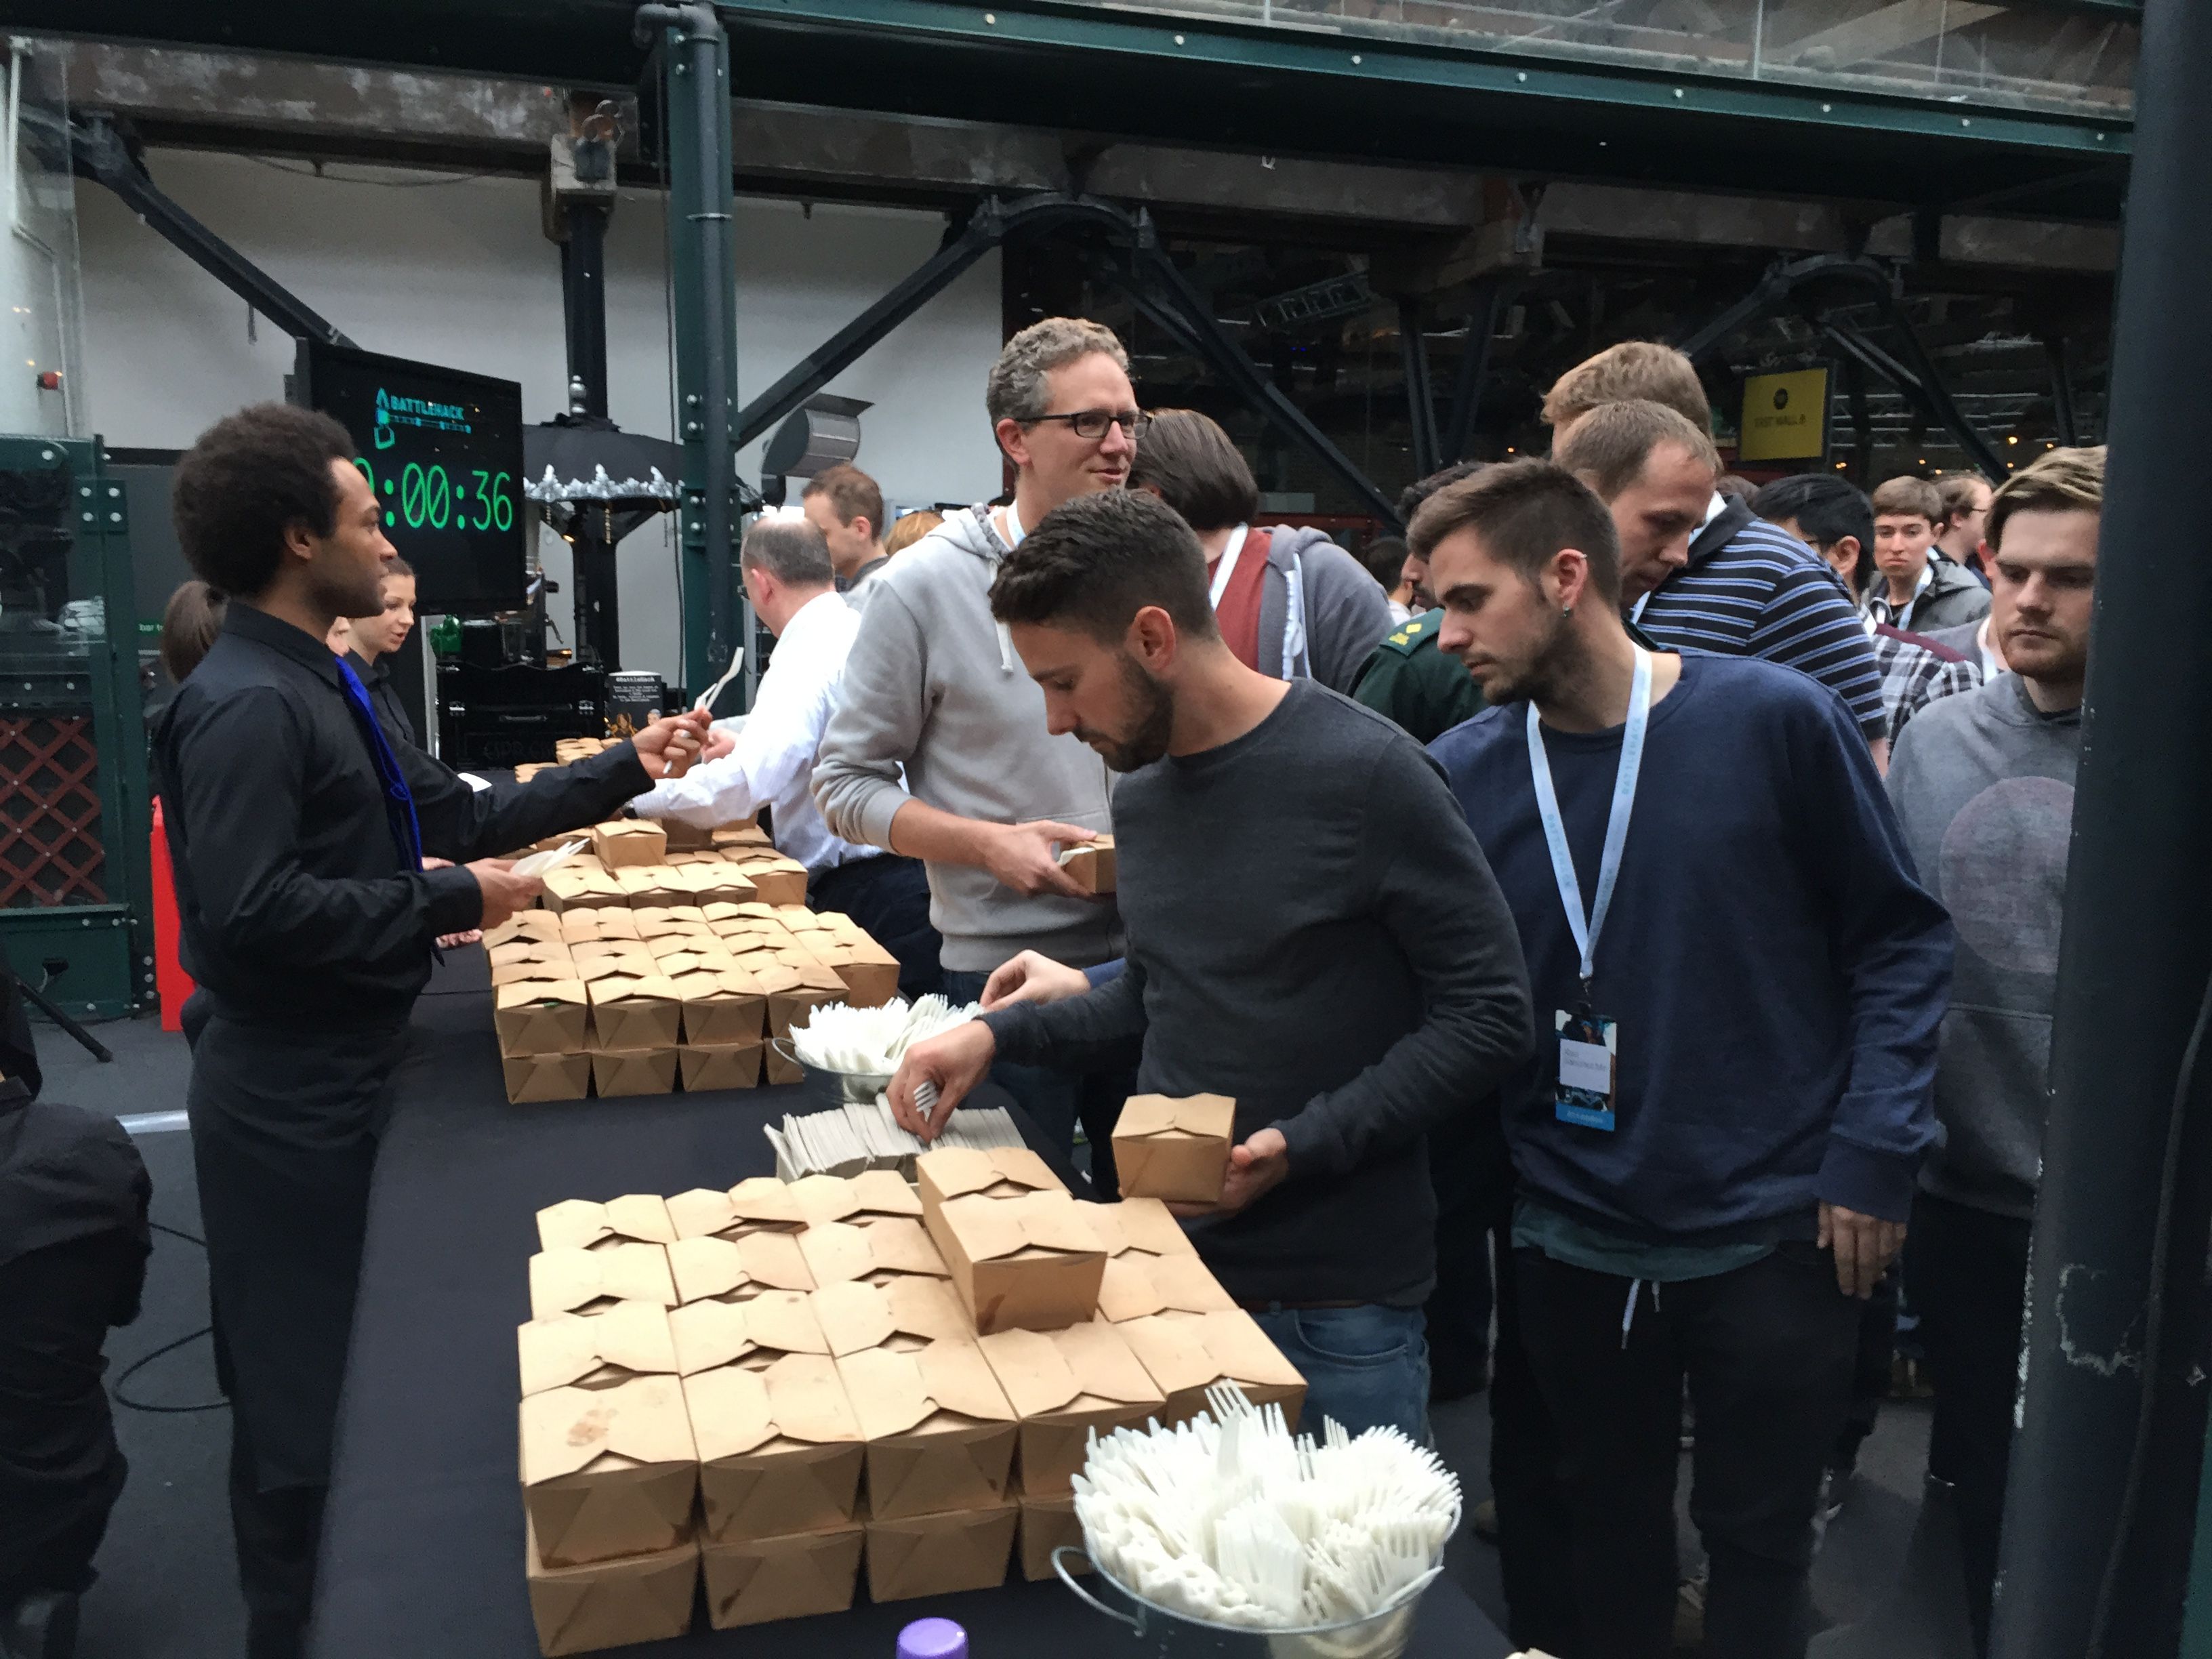 Lunchtime for some hungry hackers